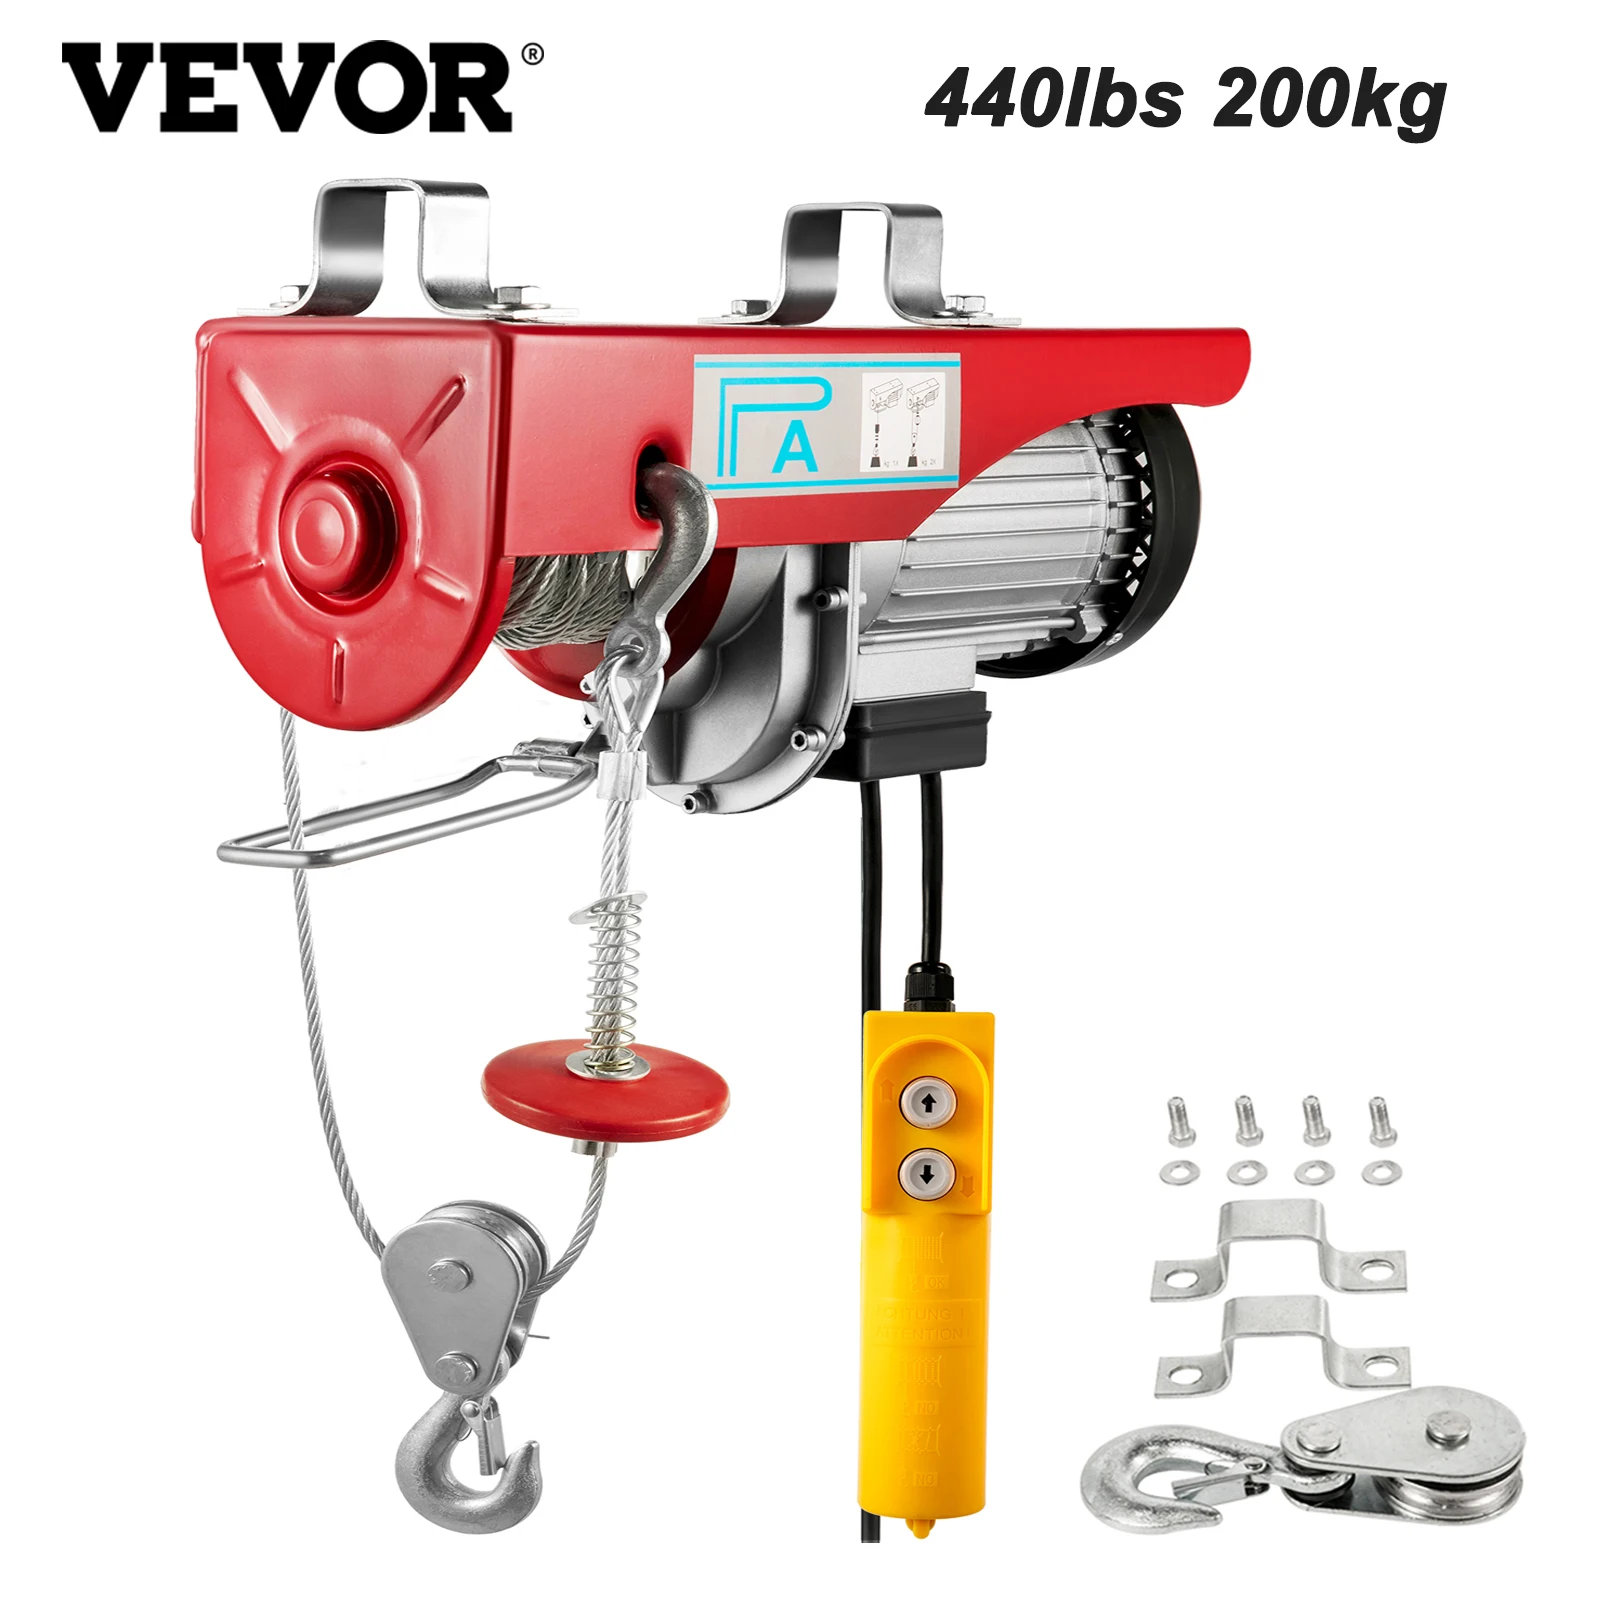 

VEVOR 440 lbs 200 kg Electric Hoist Crane New Portable Lifter Overhead Garage Winch with Wired Remote Control and Limit Switch